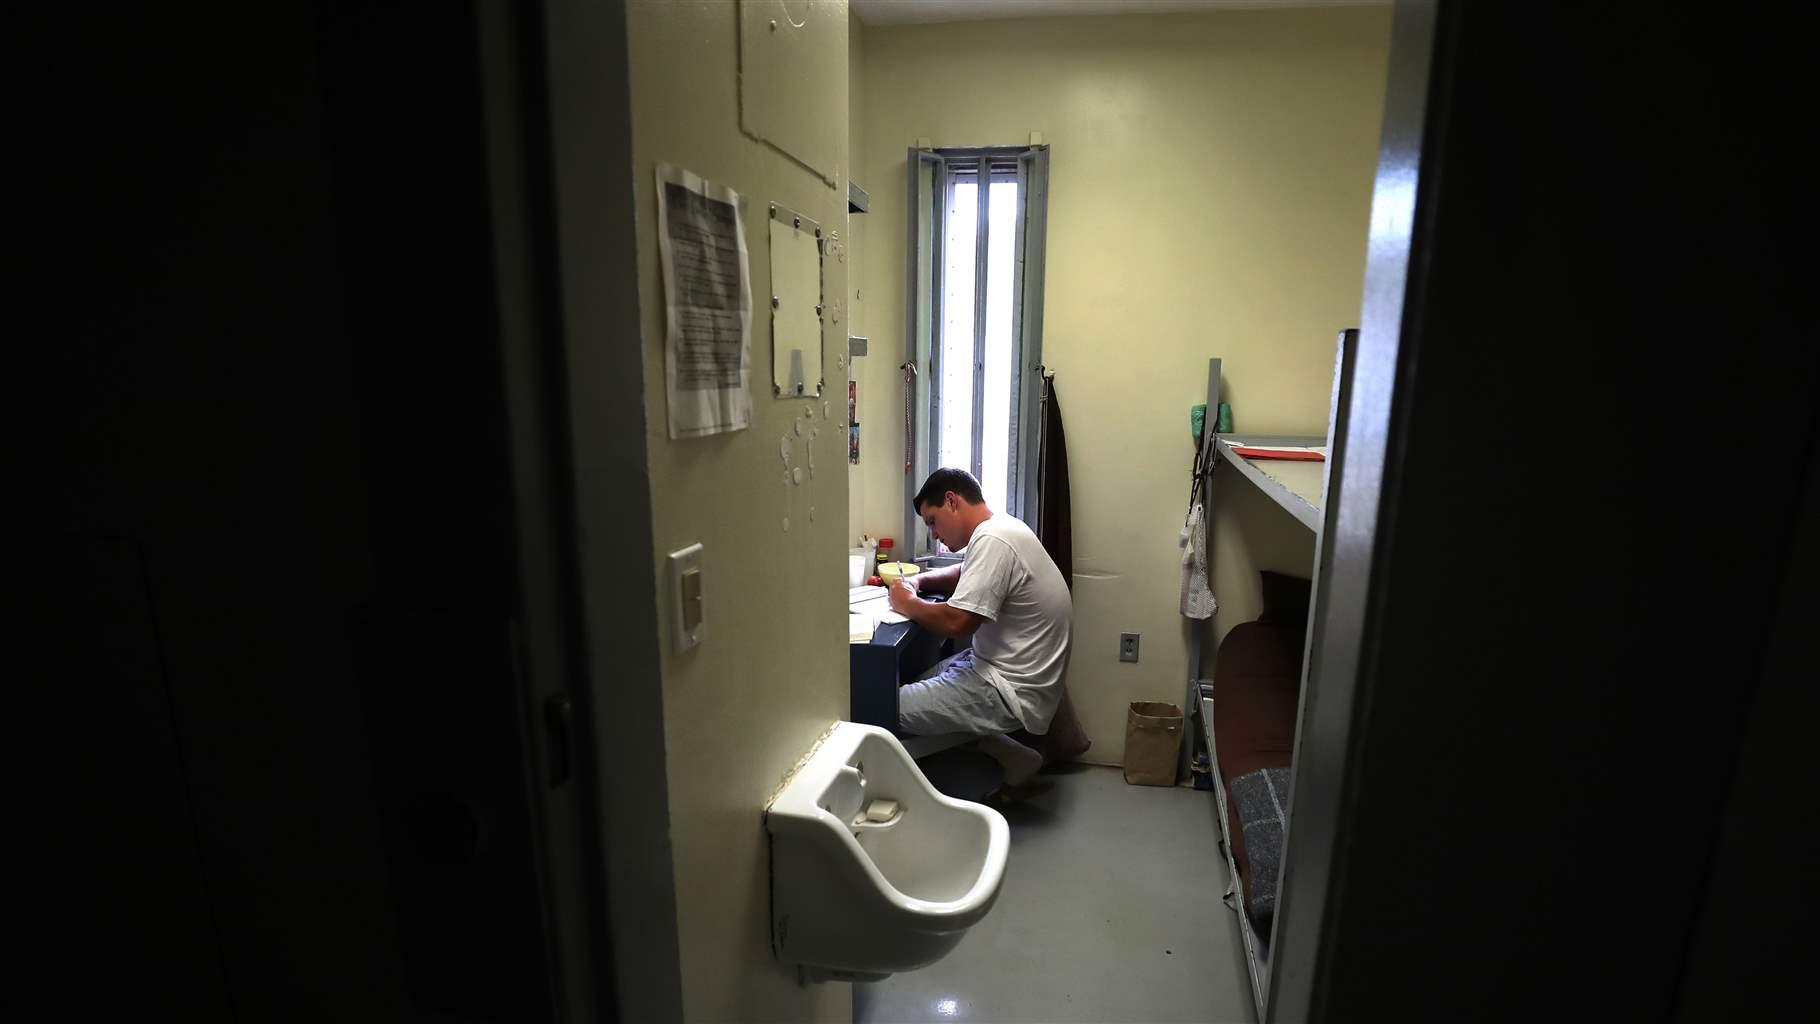 n his cell, inmate Chandler Lackey, 22, writes down on paper an Inventory of Resentments, a pilot program with a navigator (mentor) as part of STOP (Substance Treatment Opportunity Program), at the Worcester County House of Corrections in West Boylston, MA on Sep. 23, 2019. 